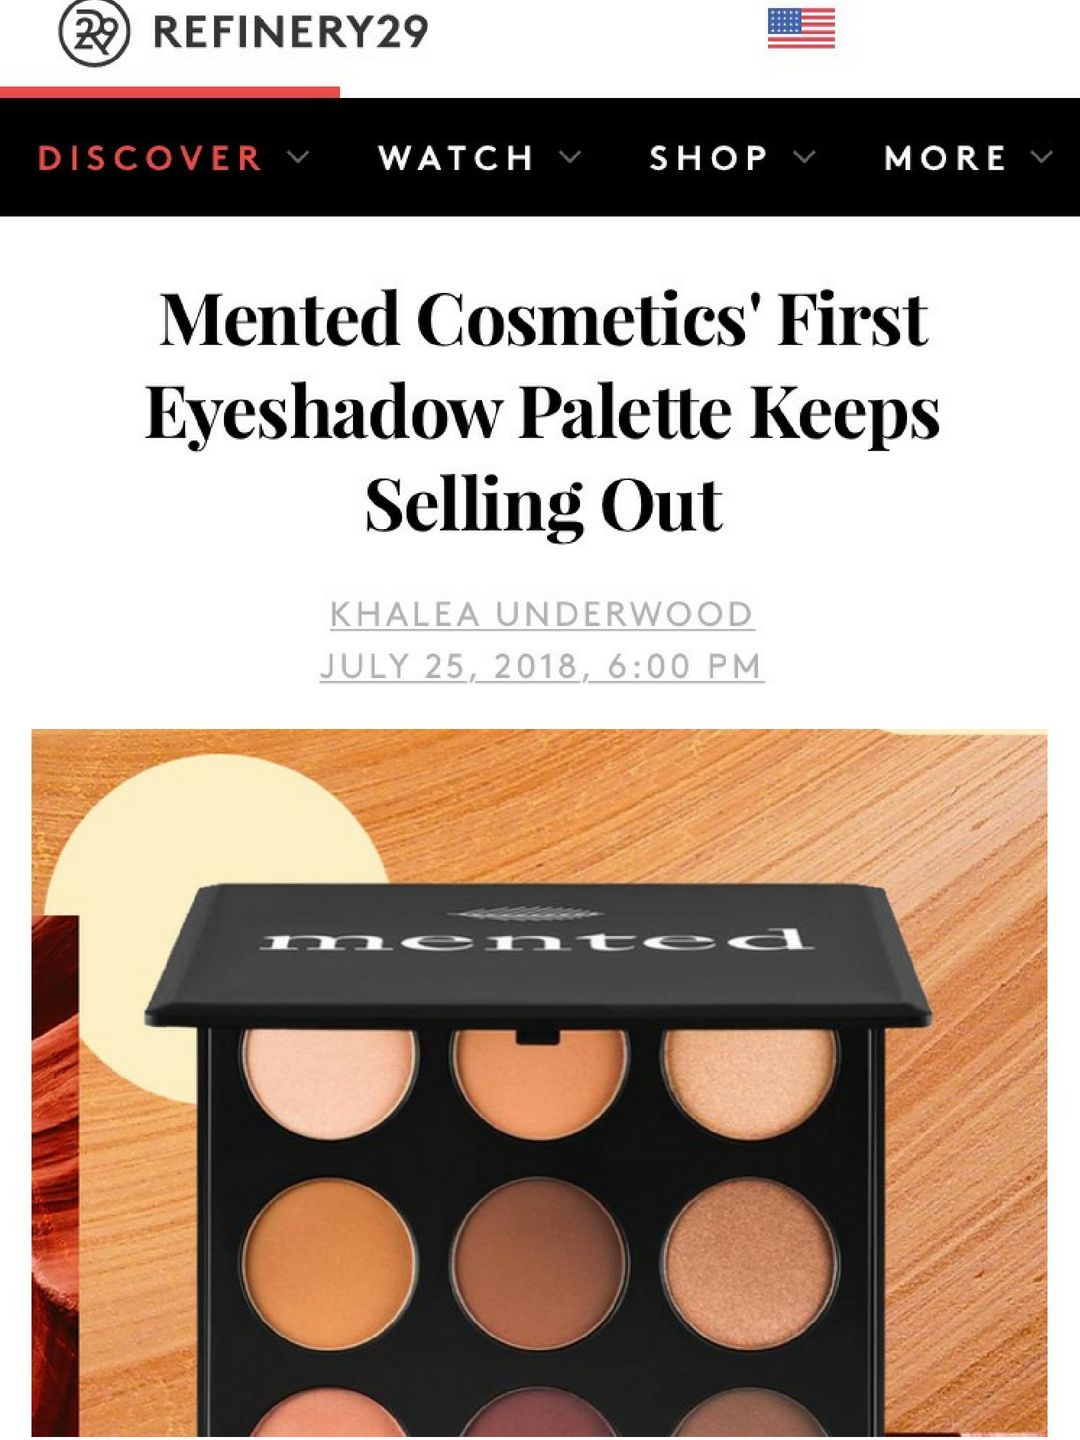 Mented Cosmetics' First Eyeshadow Palette Keeps Selling Out